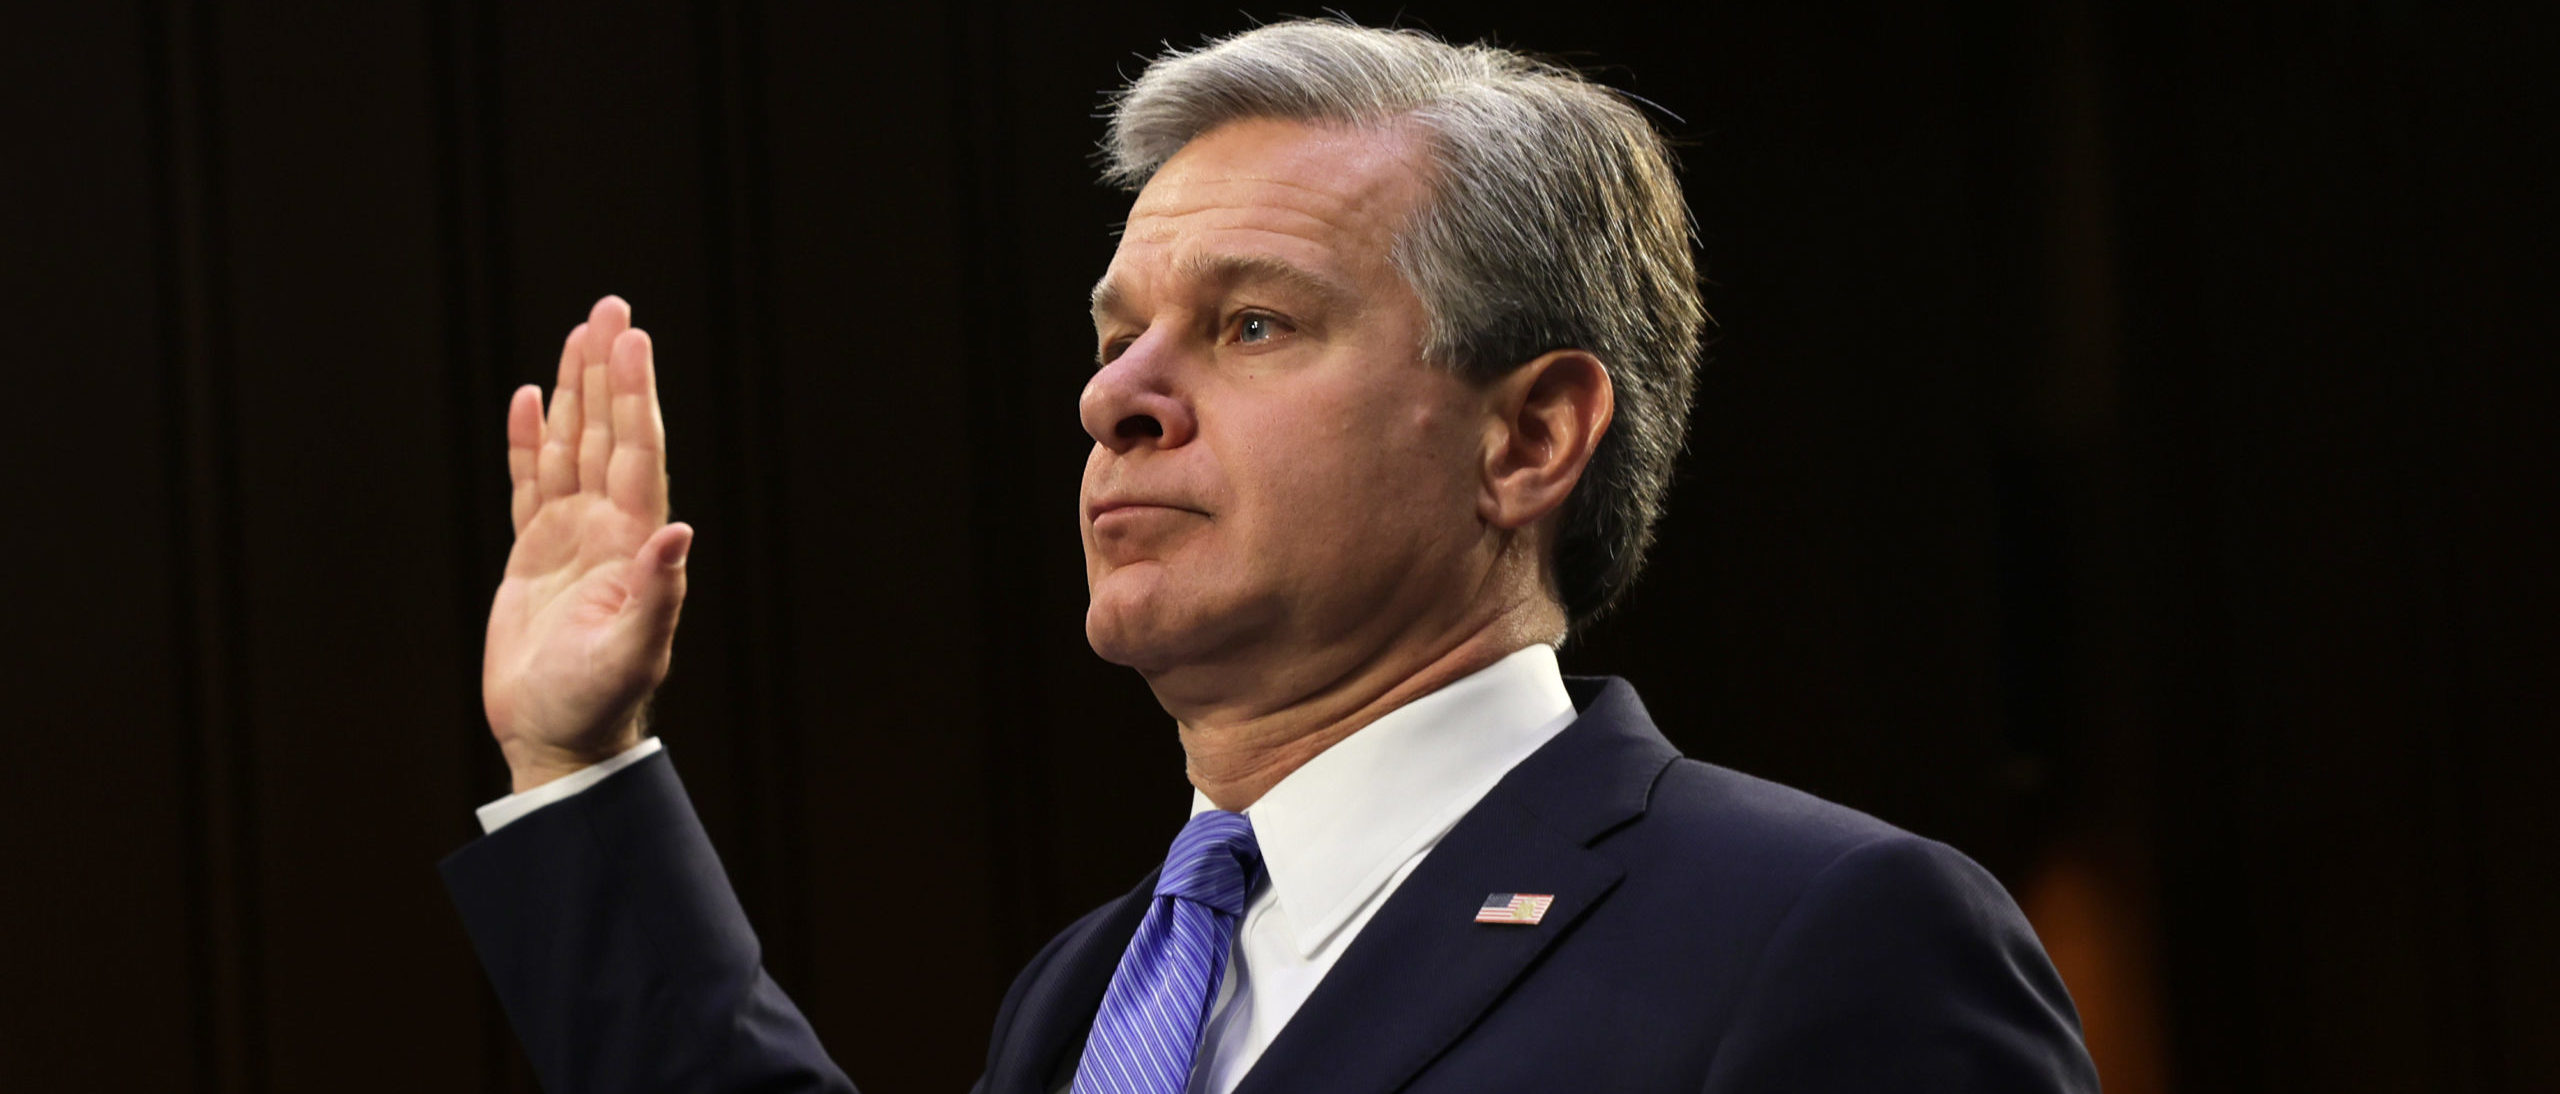 FBI Director Admits Hunter Biden Payments Could Be Part Of ‘Malign Foreign Influence’ Campaign